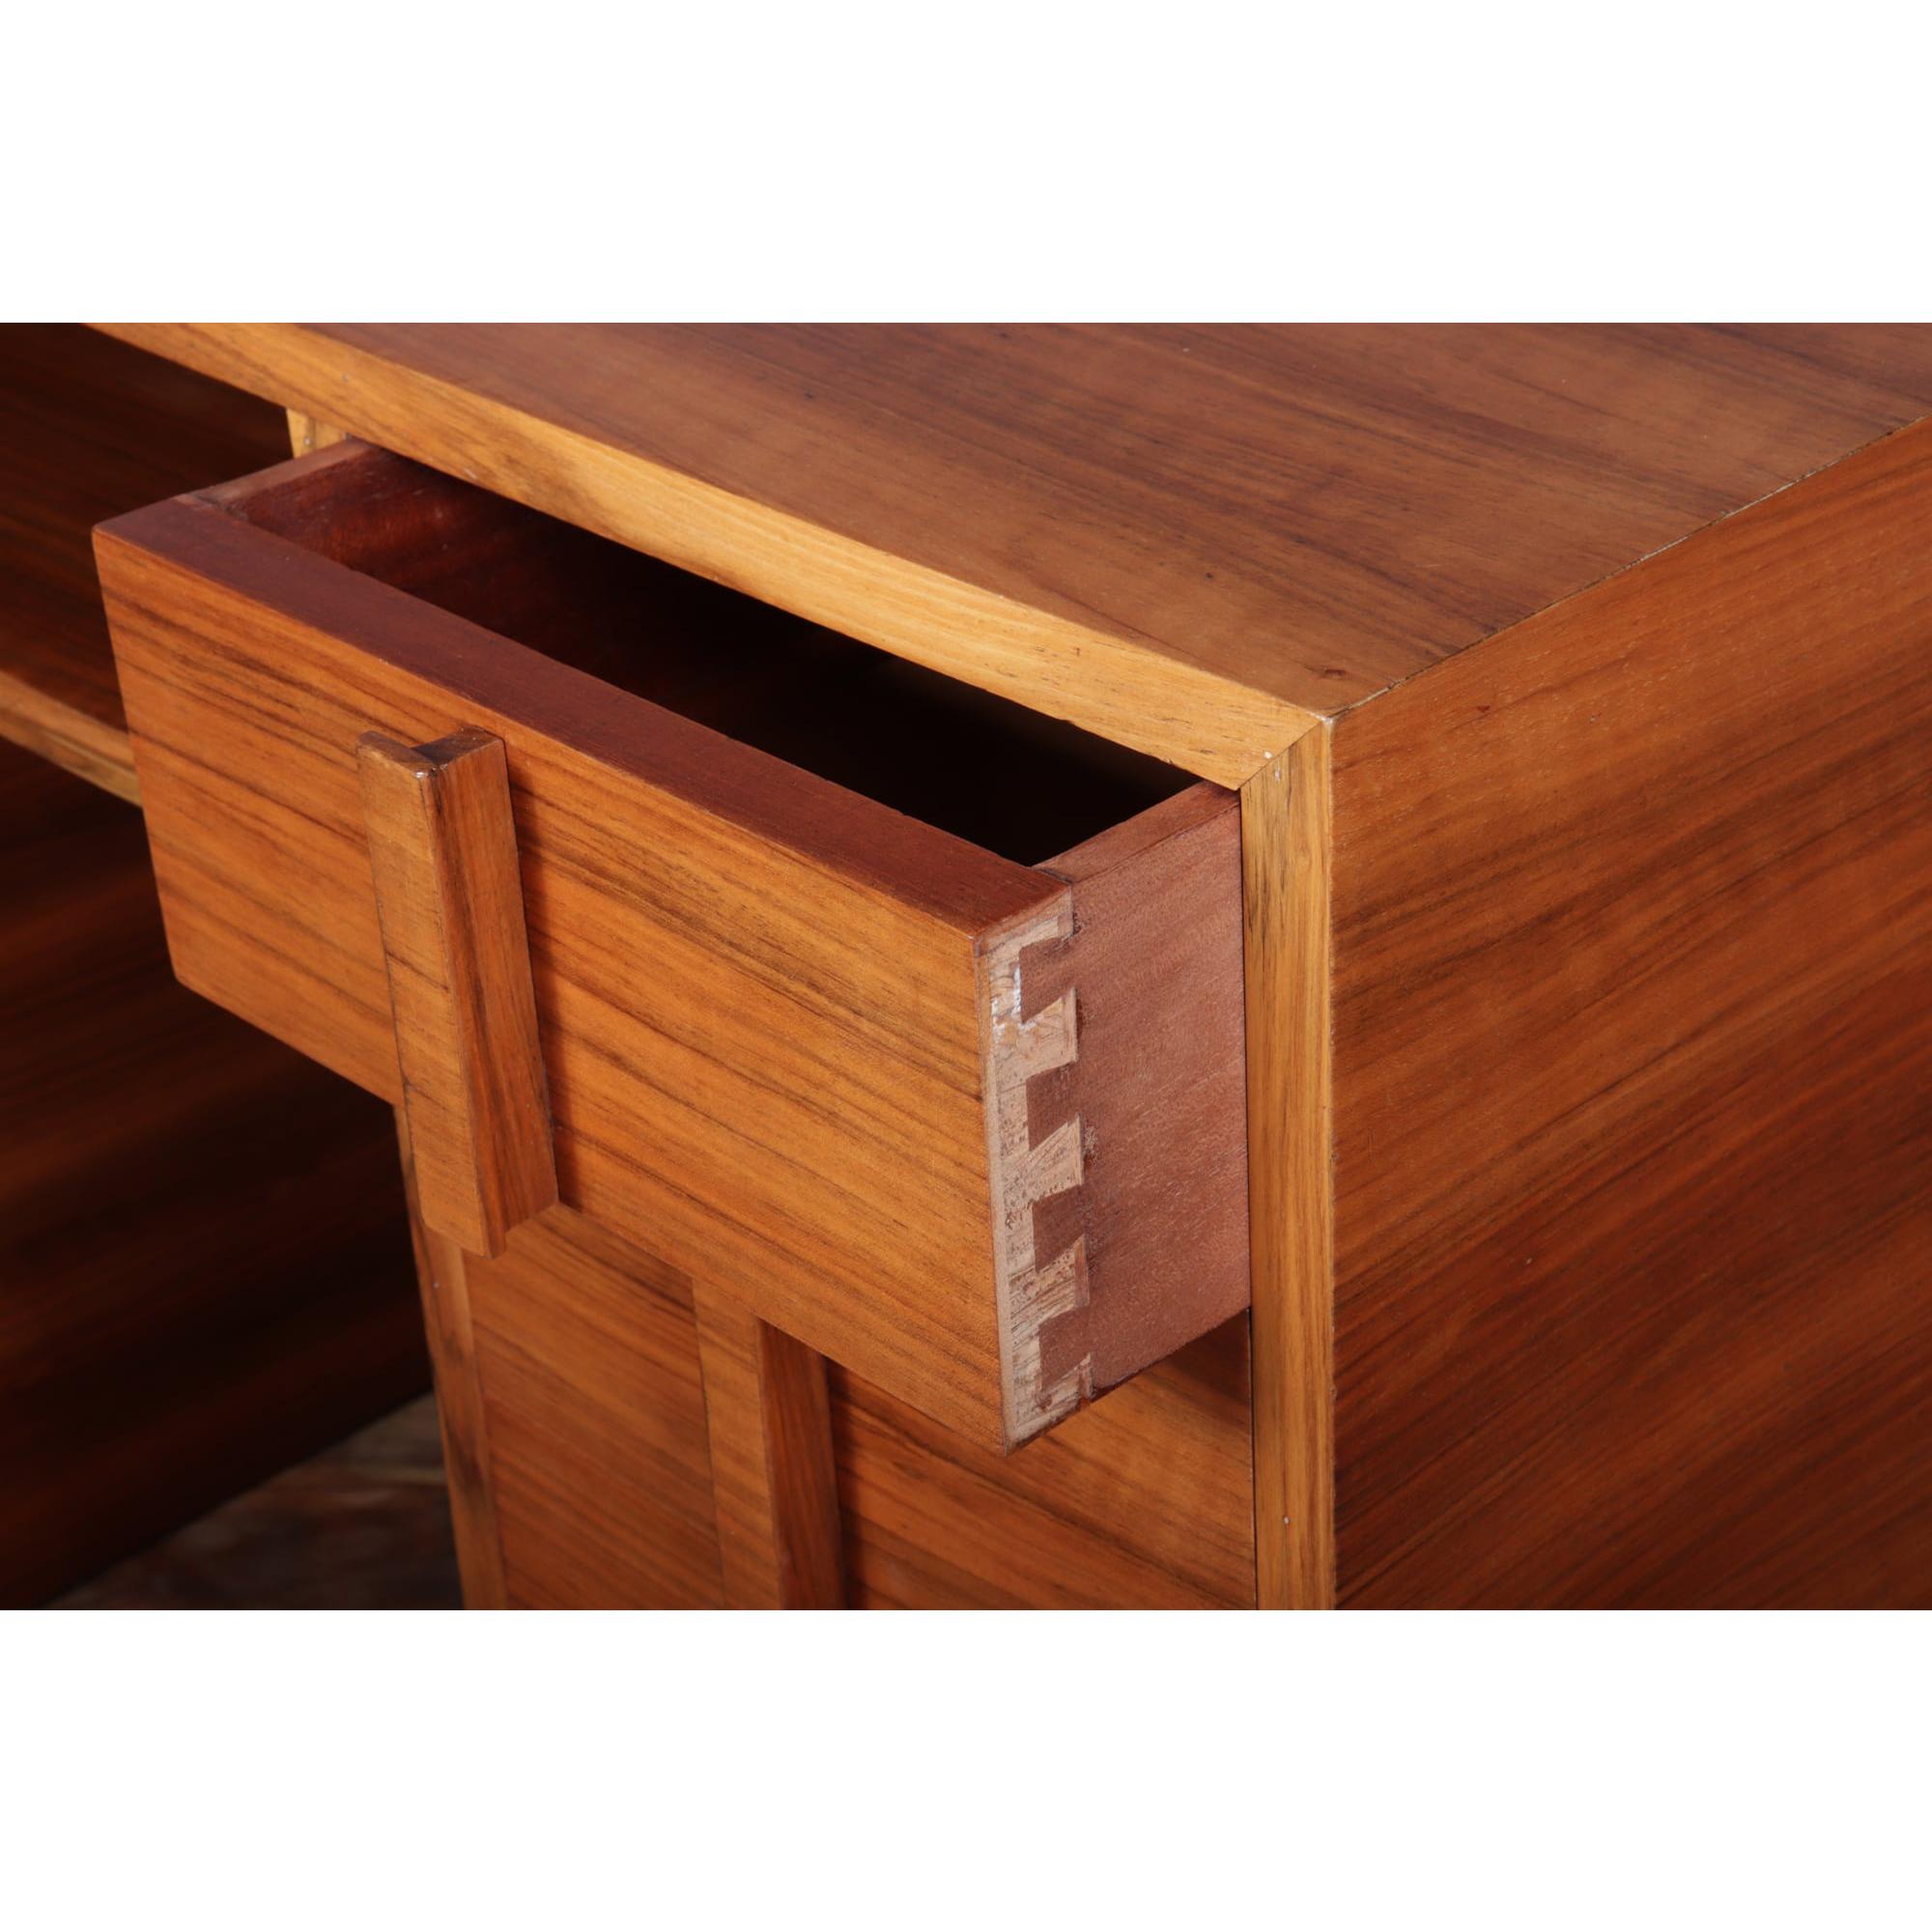 Art Deco desk in walnut c1930
A walnut single pedestal desk produced in the UK in the 1930’s, the desk is of sturdy construction dovetail jointed drawers and has been fully restored and polished and is in great condition but does bear some age